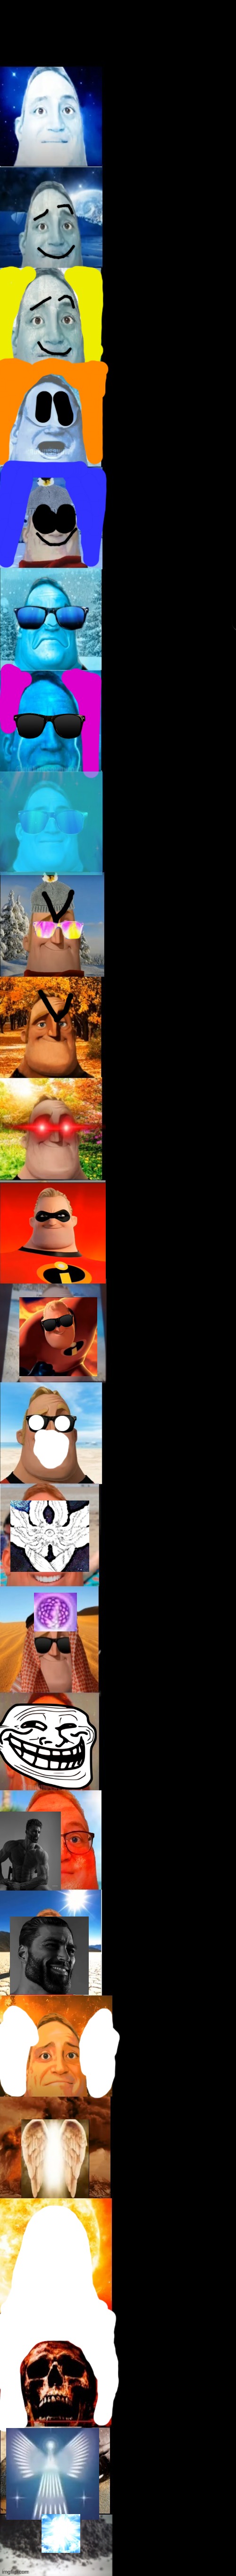 Mr. Incredible becoming cold to hot and canny at the same time extended | image tagged in mr incredible becoming cold to hot pre extended | made w/ Imgflip meme maker